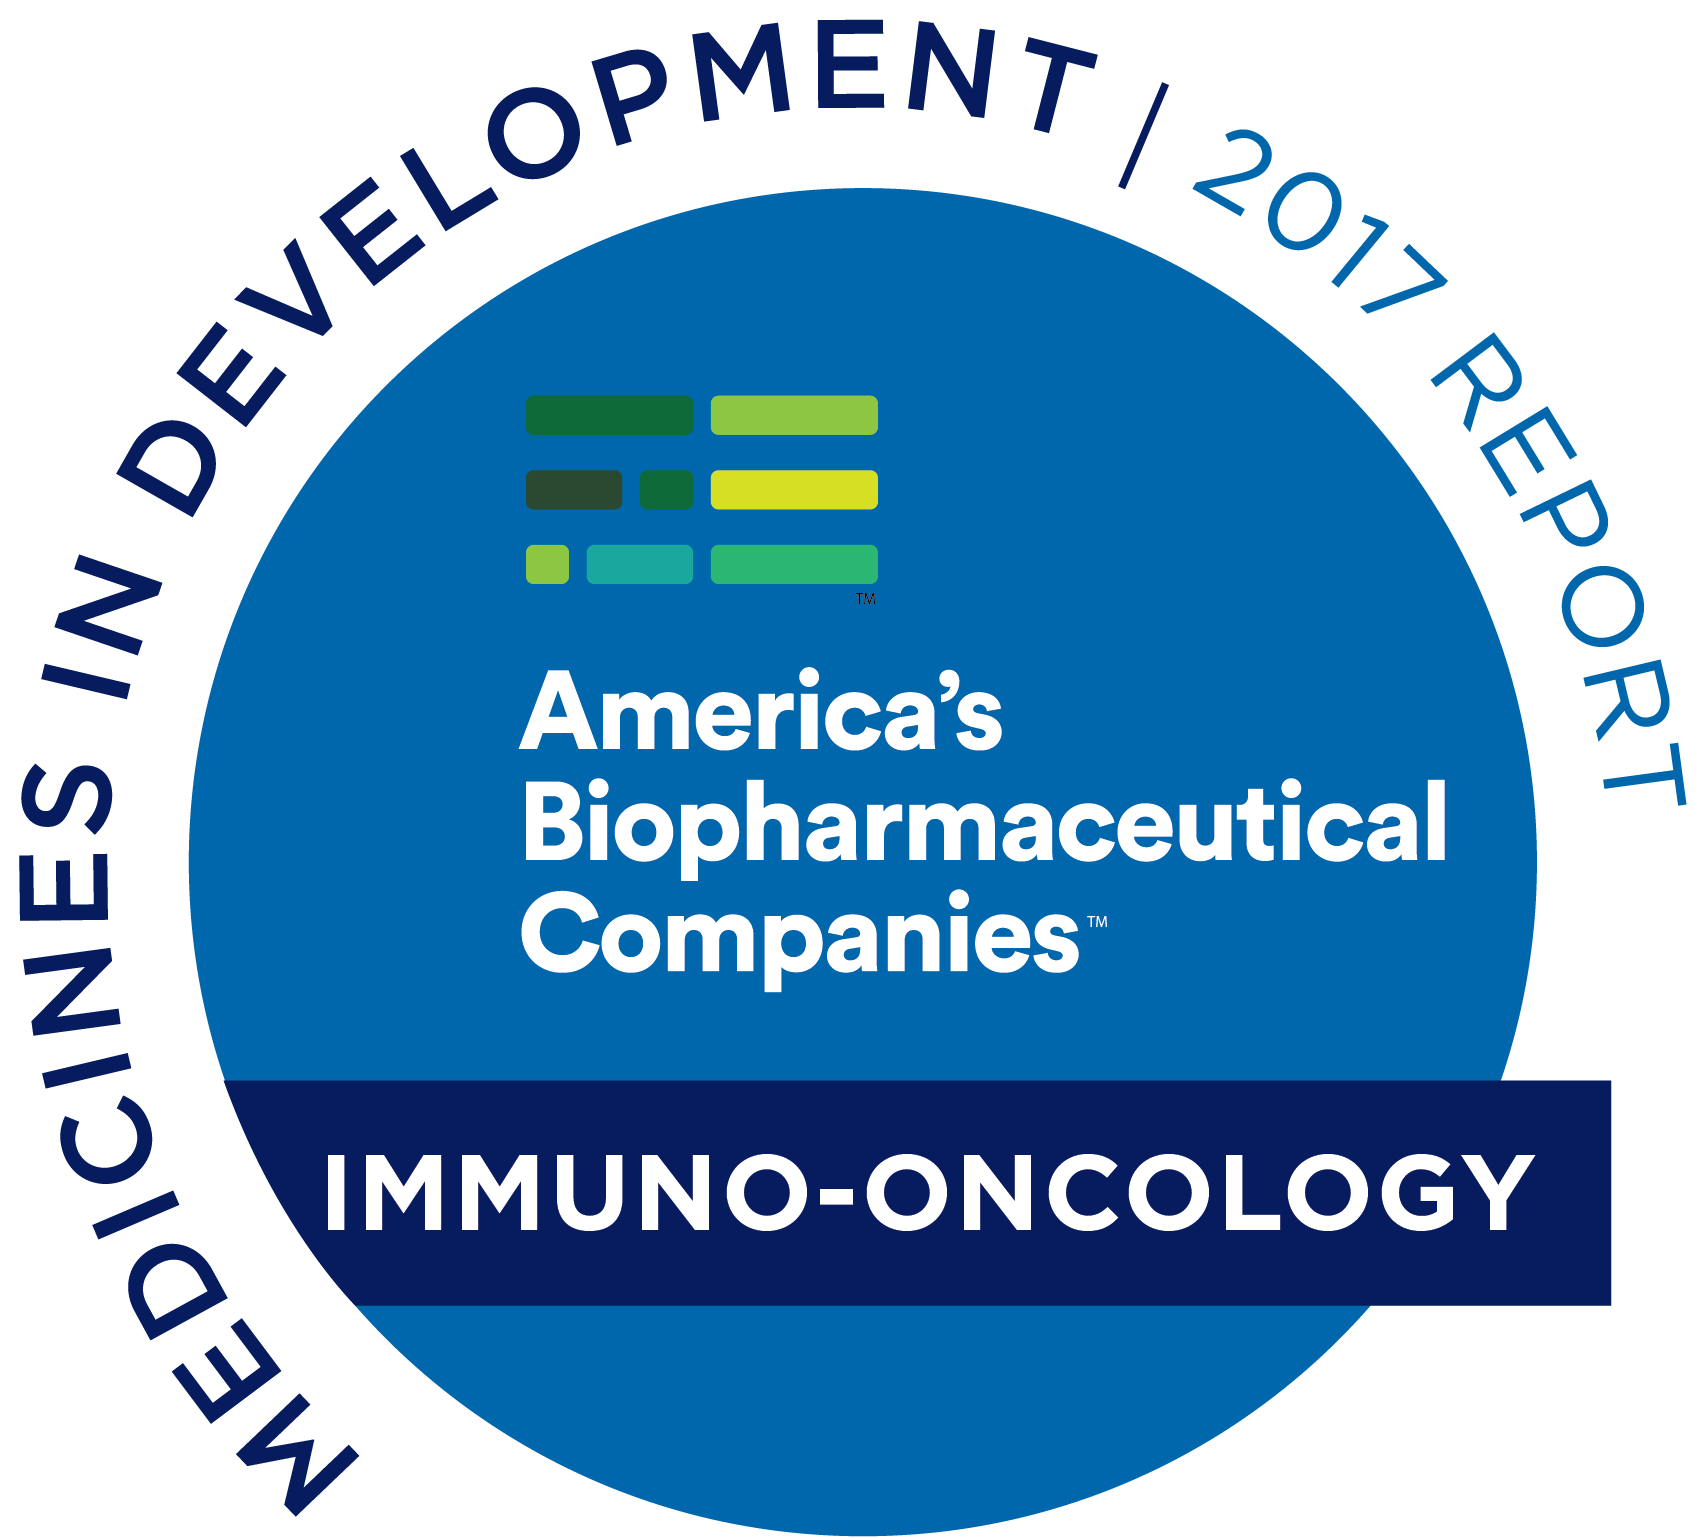 more-than-240-immuno-oncology-treatments-in-development-to-fight-cancer